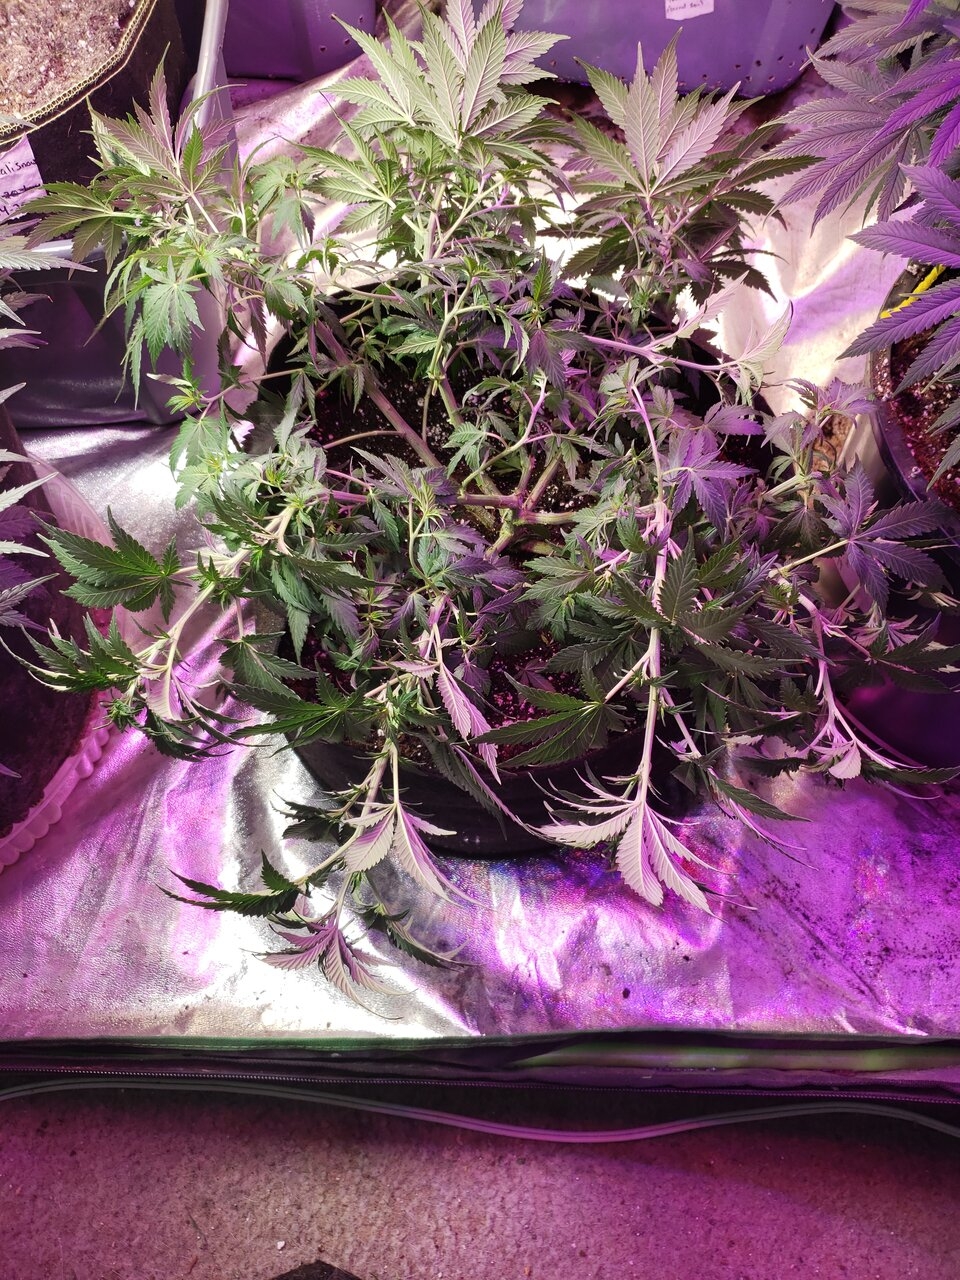 White Widow #2 after training